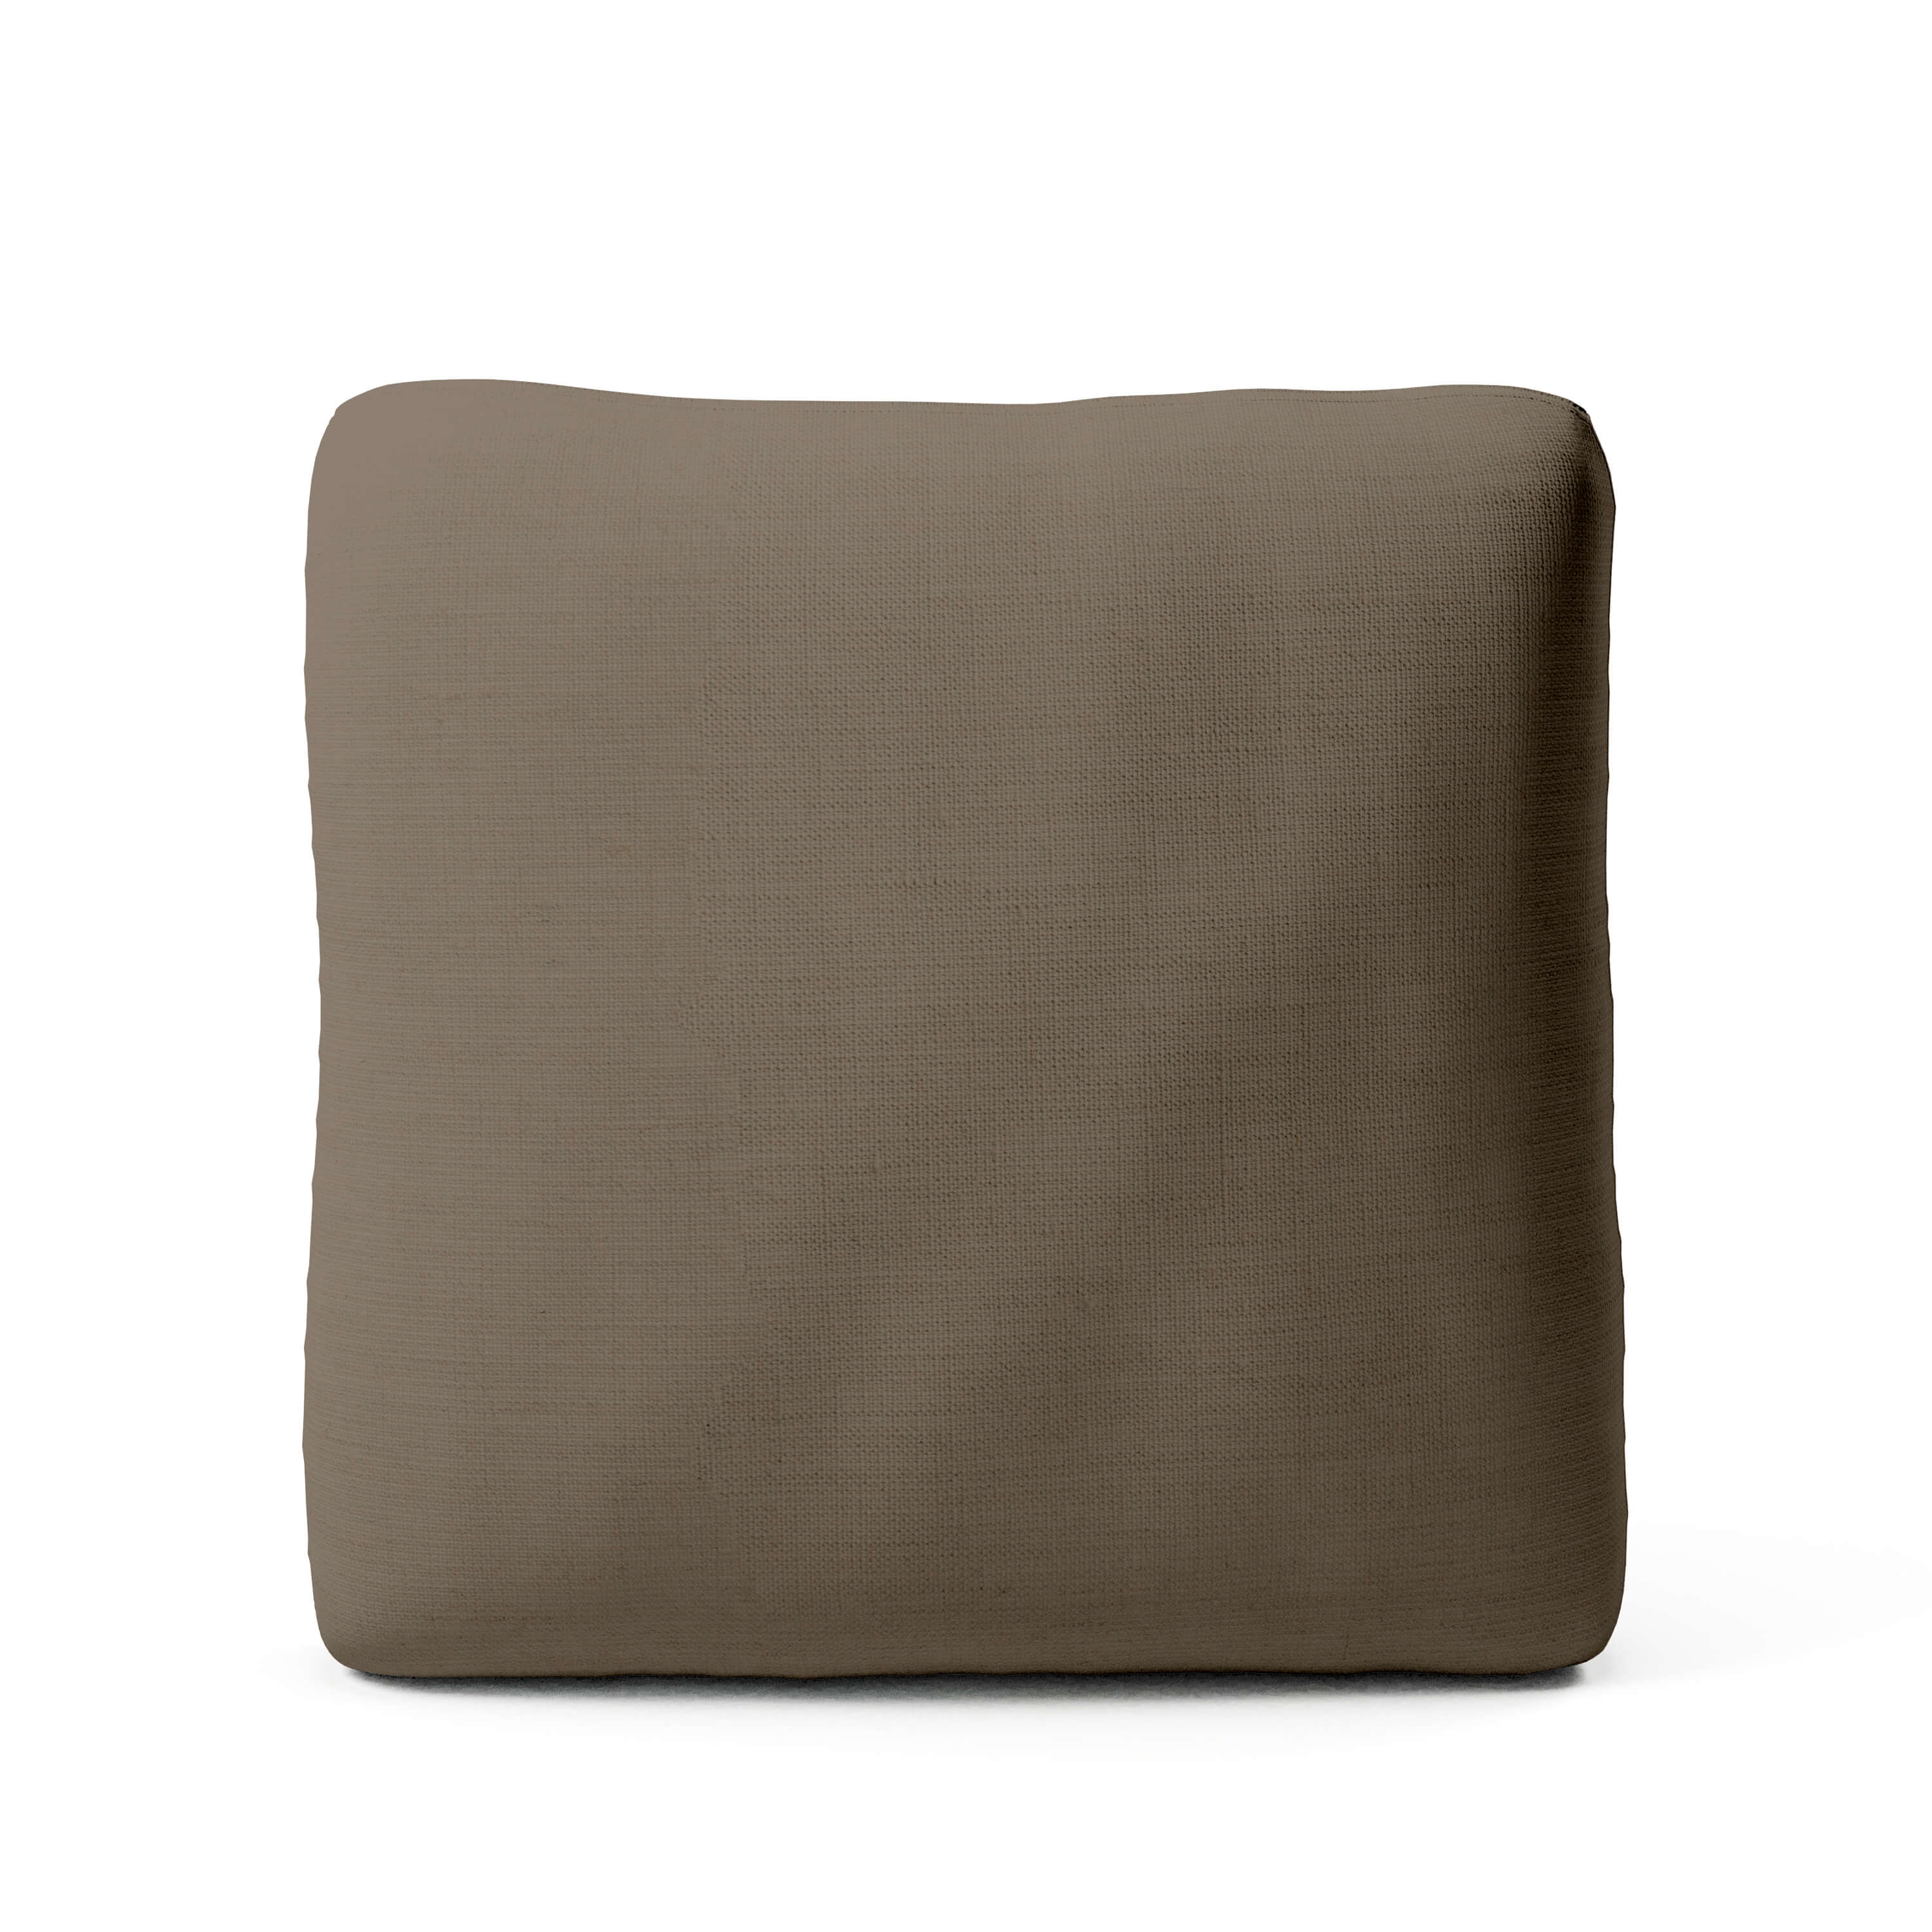 Comfy Sofa - Seat Cushion Replacement